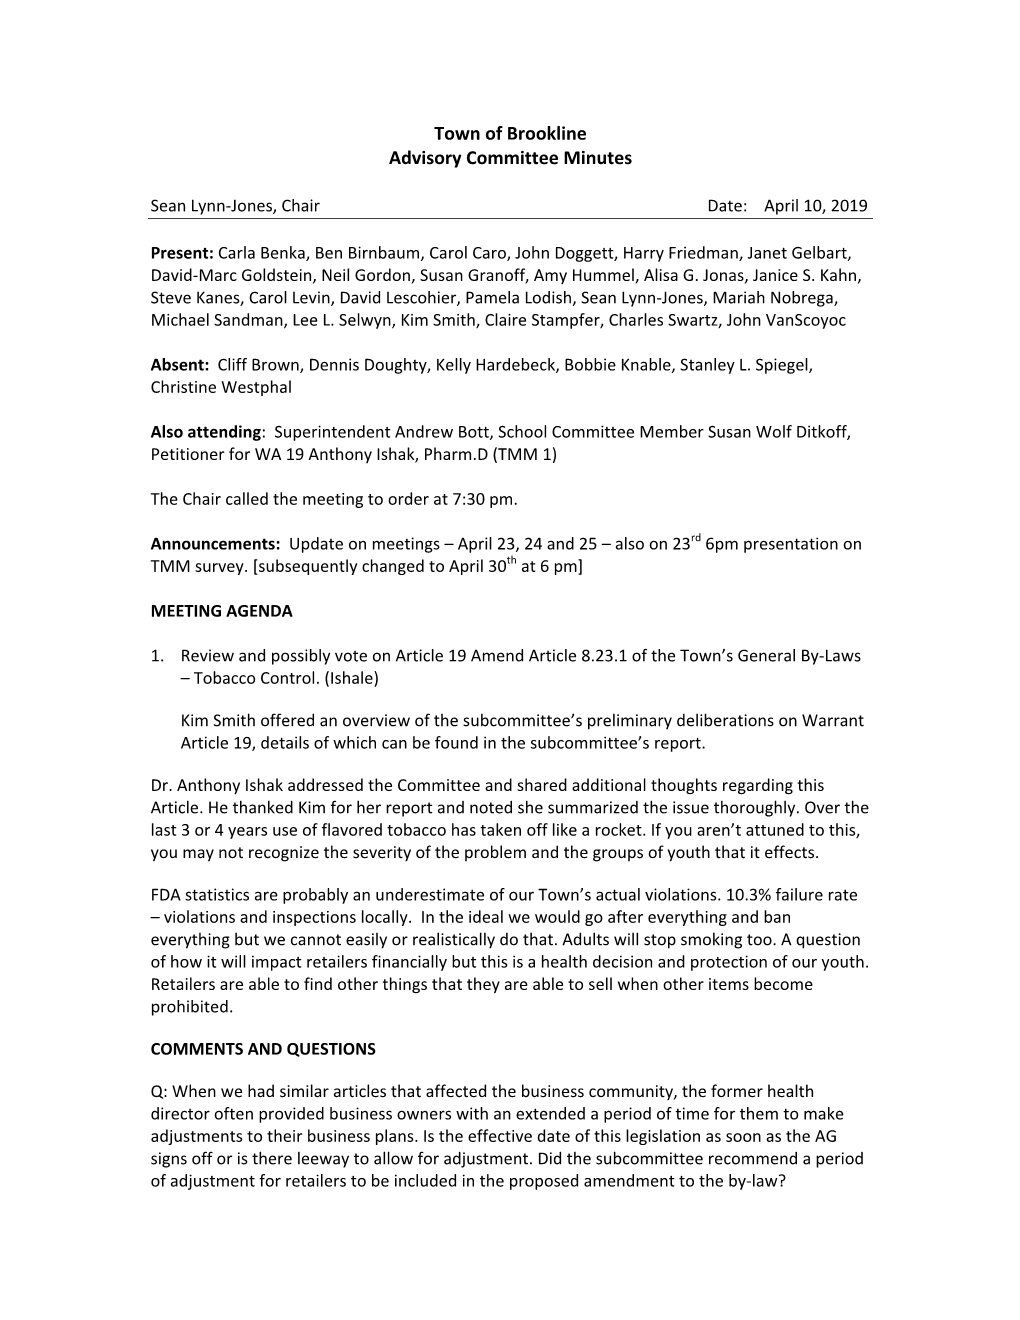 Town of Brookline Advisory Committee Minutes